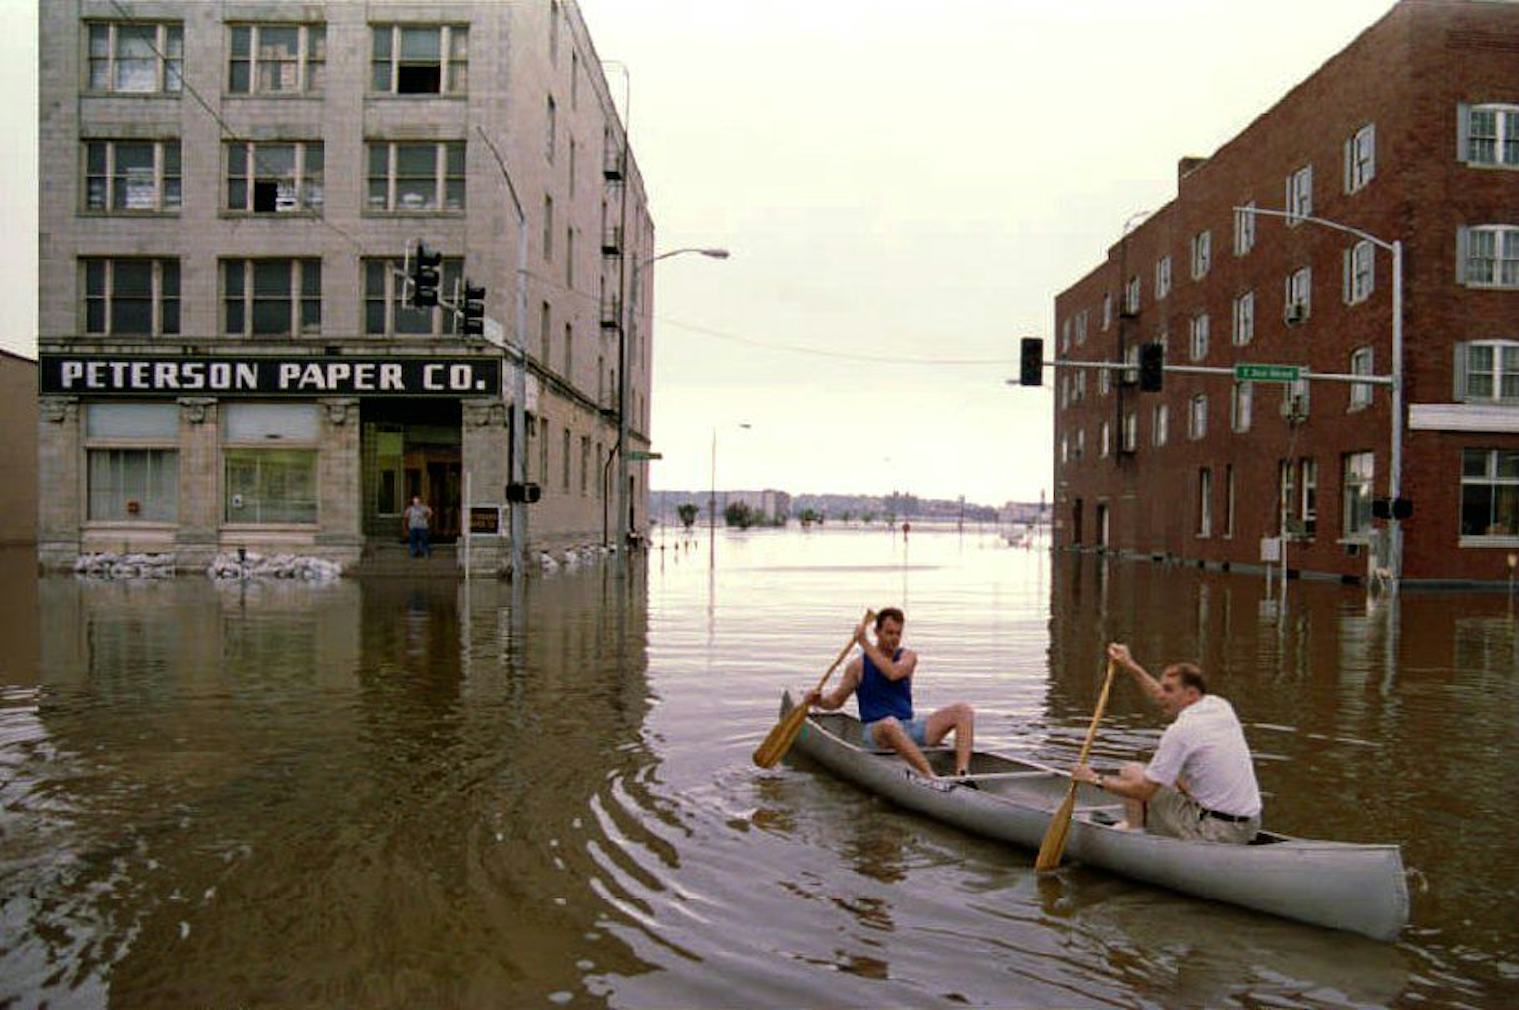 The 8 Worst Floods In U.S. History Show How Devastating Extreme Weather